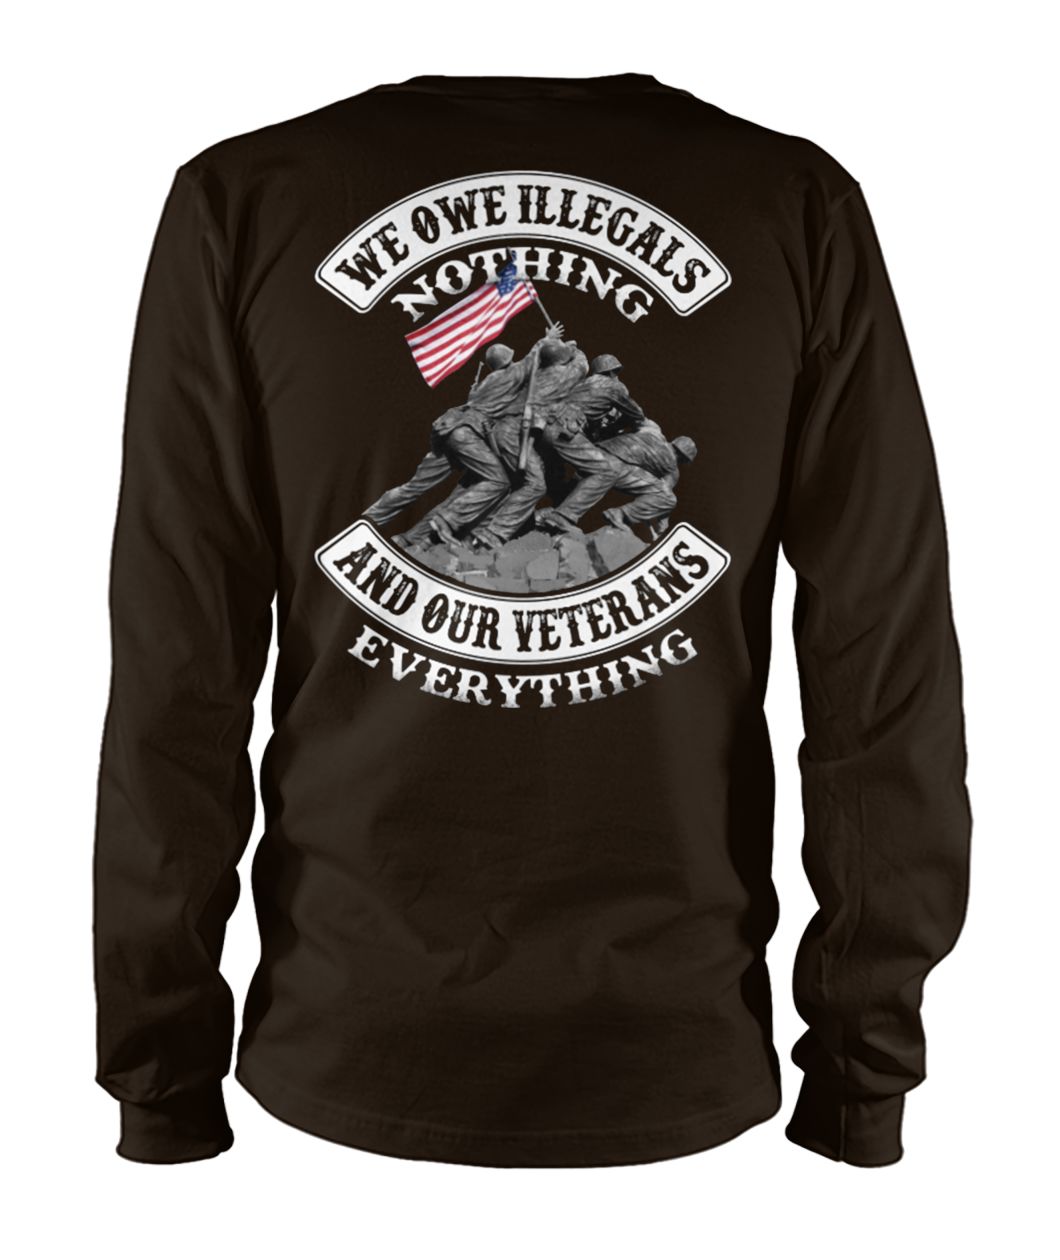 We owe illegals nothing we owe our veterans everything unisex long sleeve